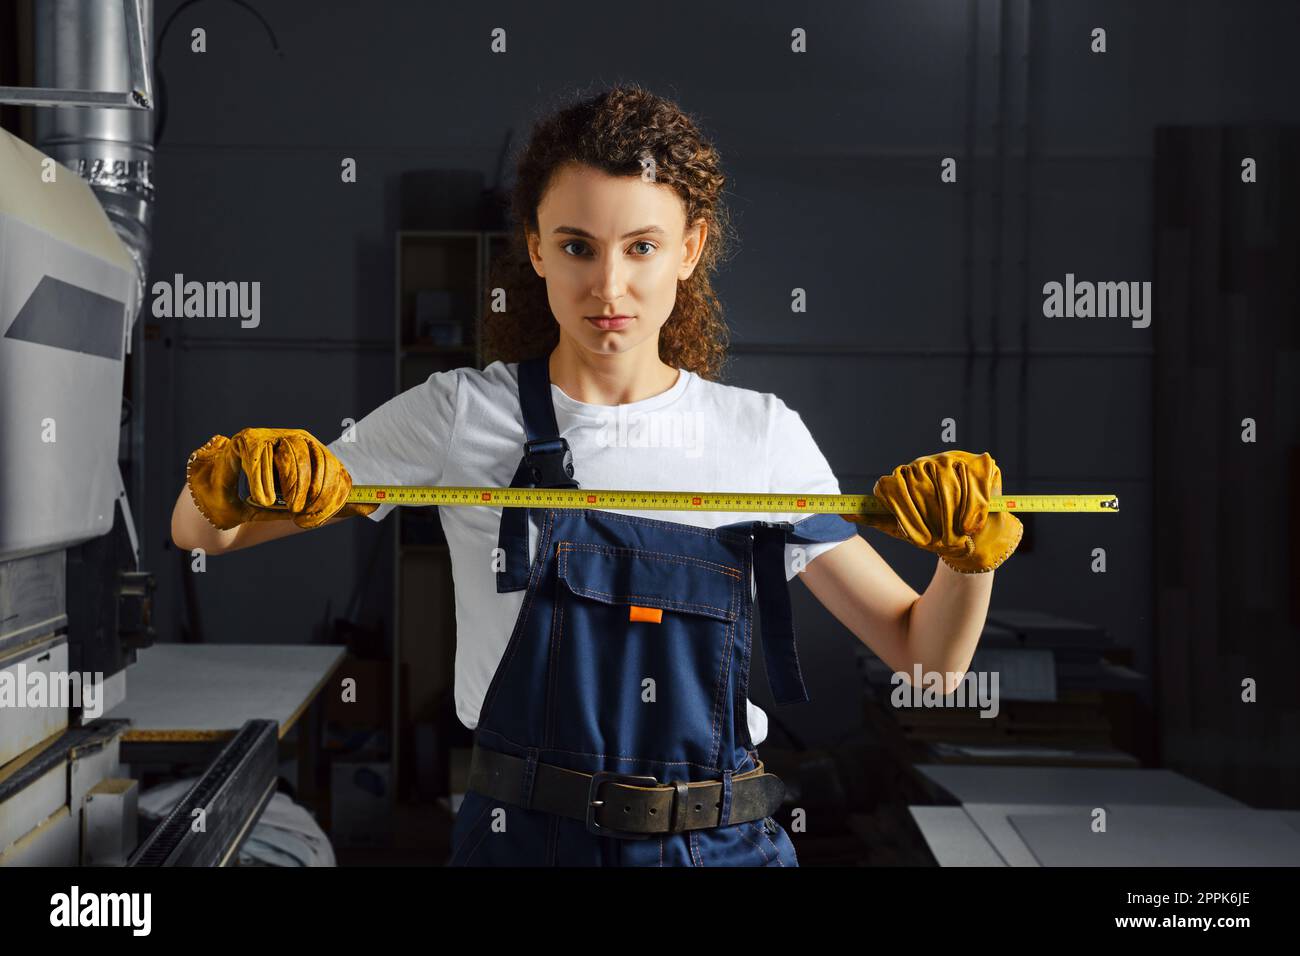 Female worker with a tape measure in hand Stock Photo